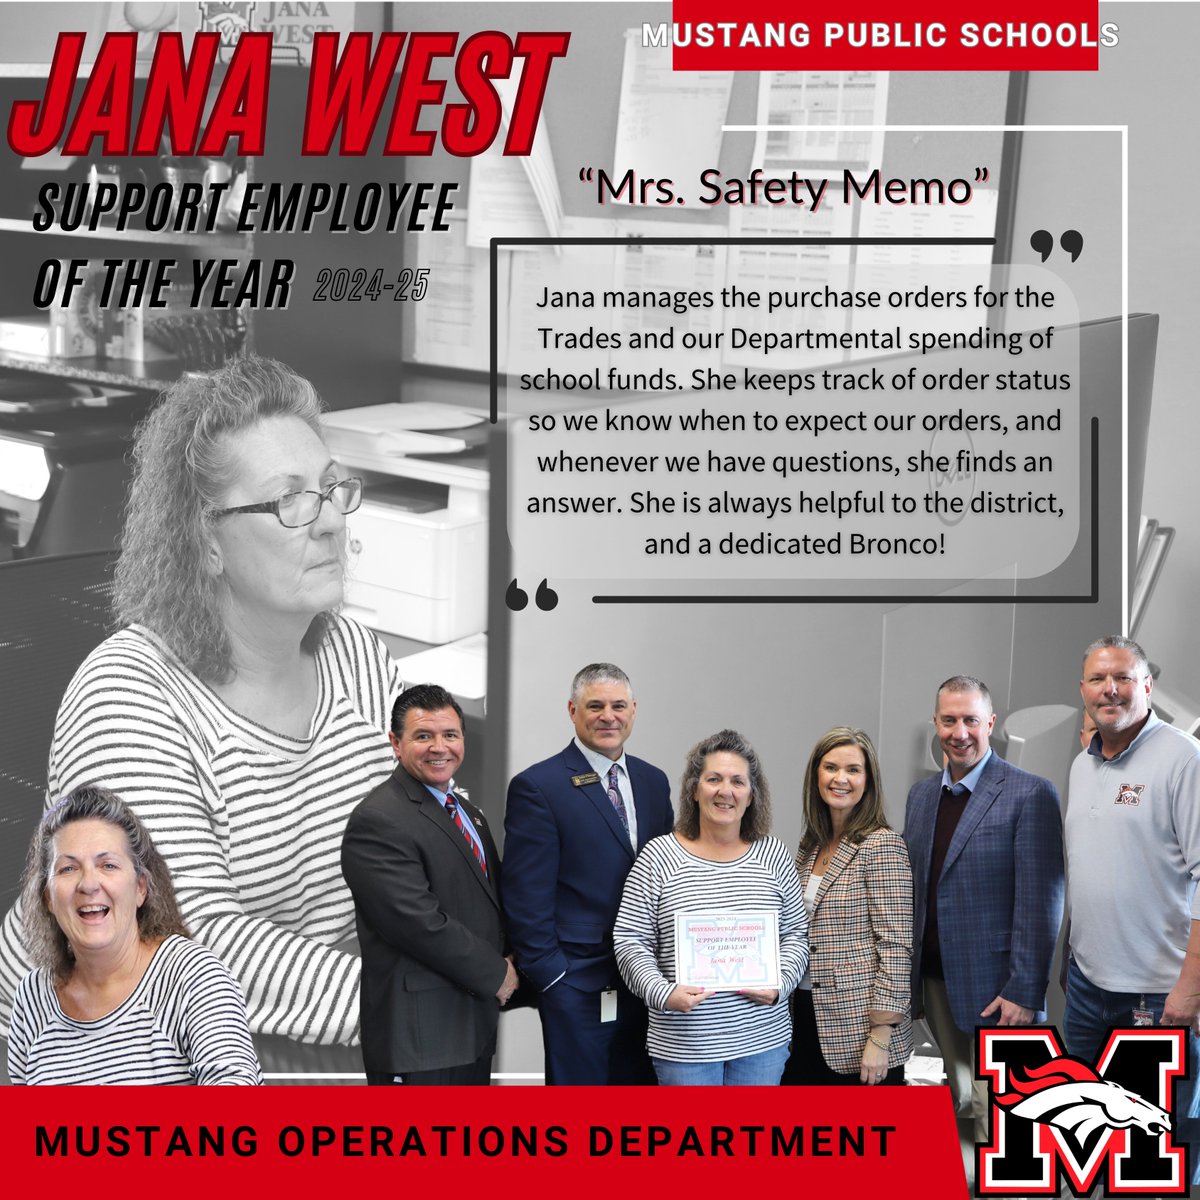 We're also putting the spotlight on our 3 Support Personnel of the Year, who go above & beyond every day. Introducing Jana West!  She's the backbone of the Operations Dept, making a profound impact on our District. Your commitment to excellence is inspiring, Jana! #BroncoPride